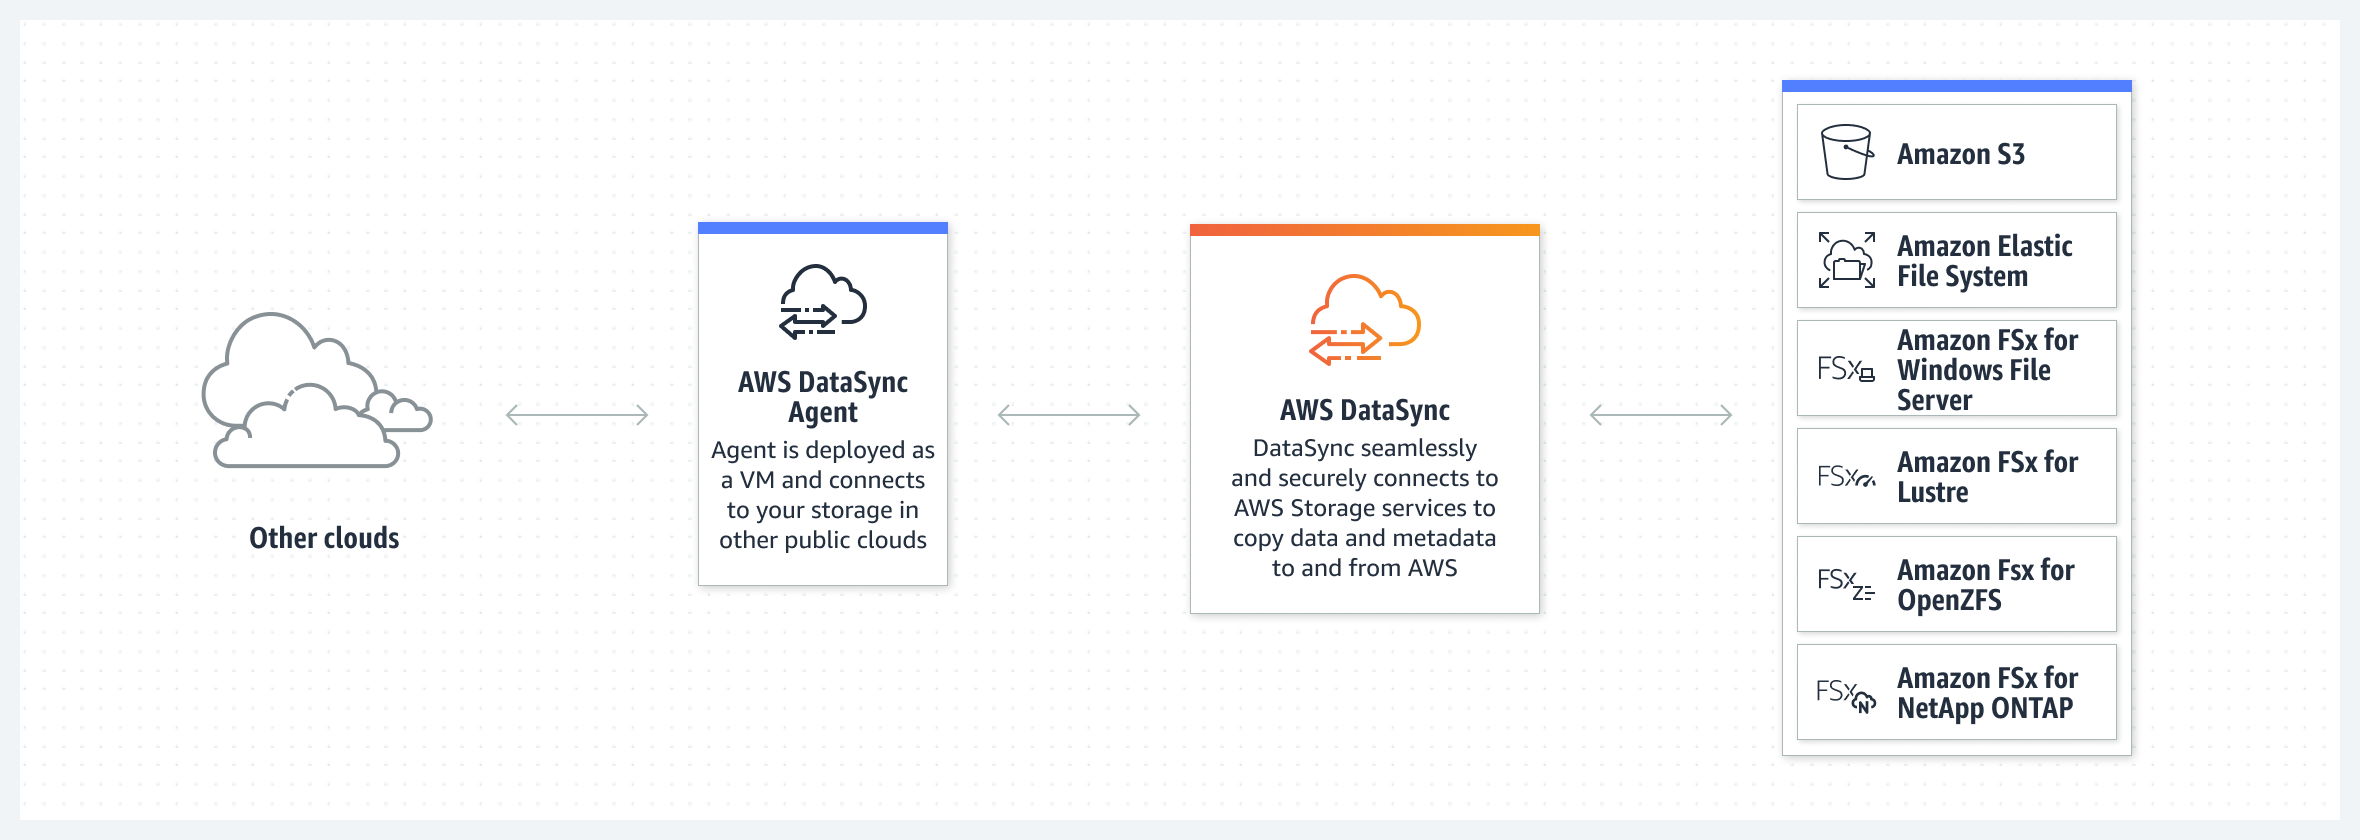 AWS DataSync supports moving data between other public clouds and AWS Storage Services